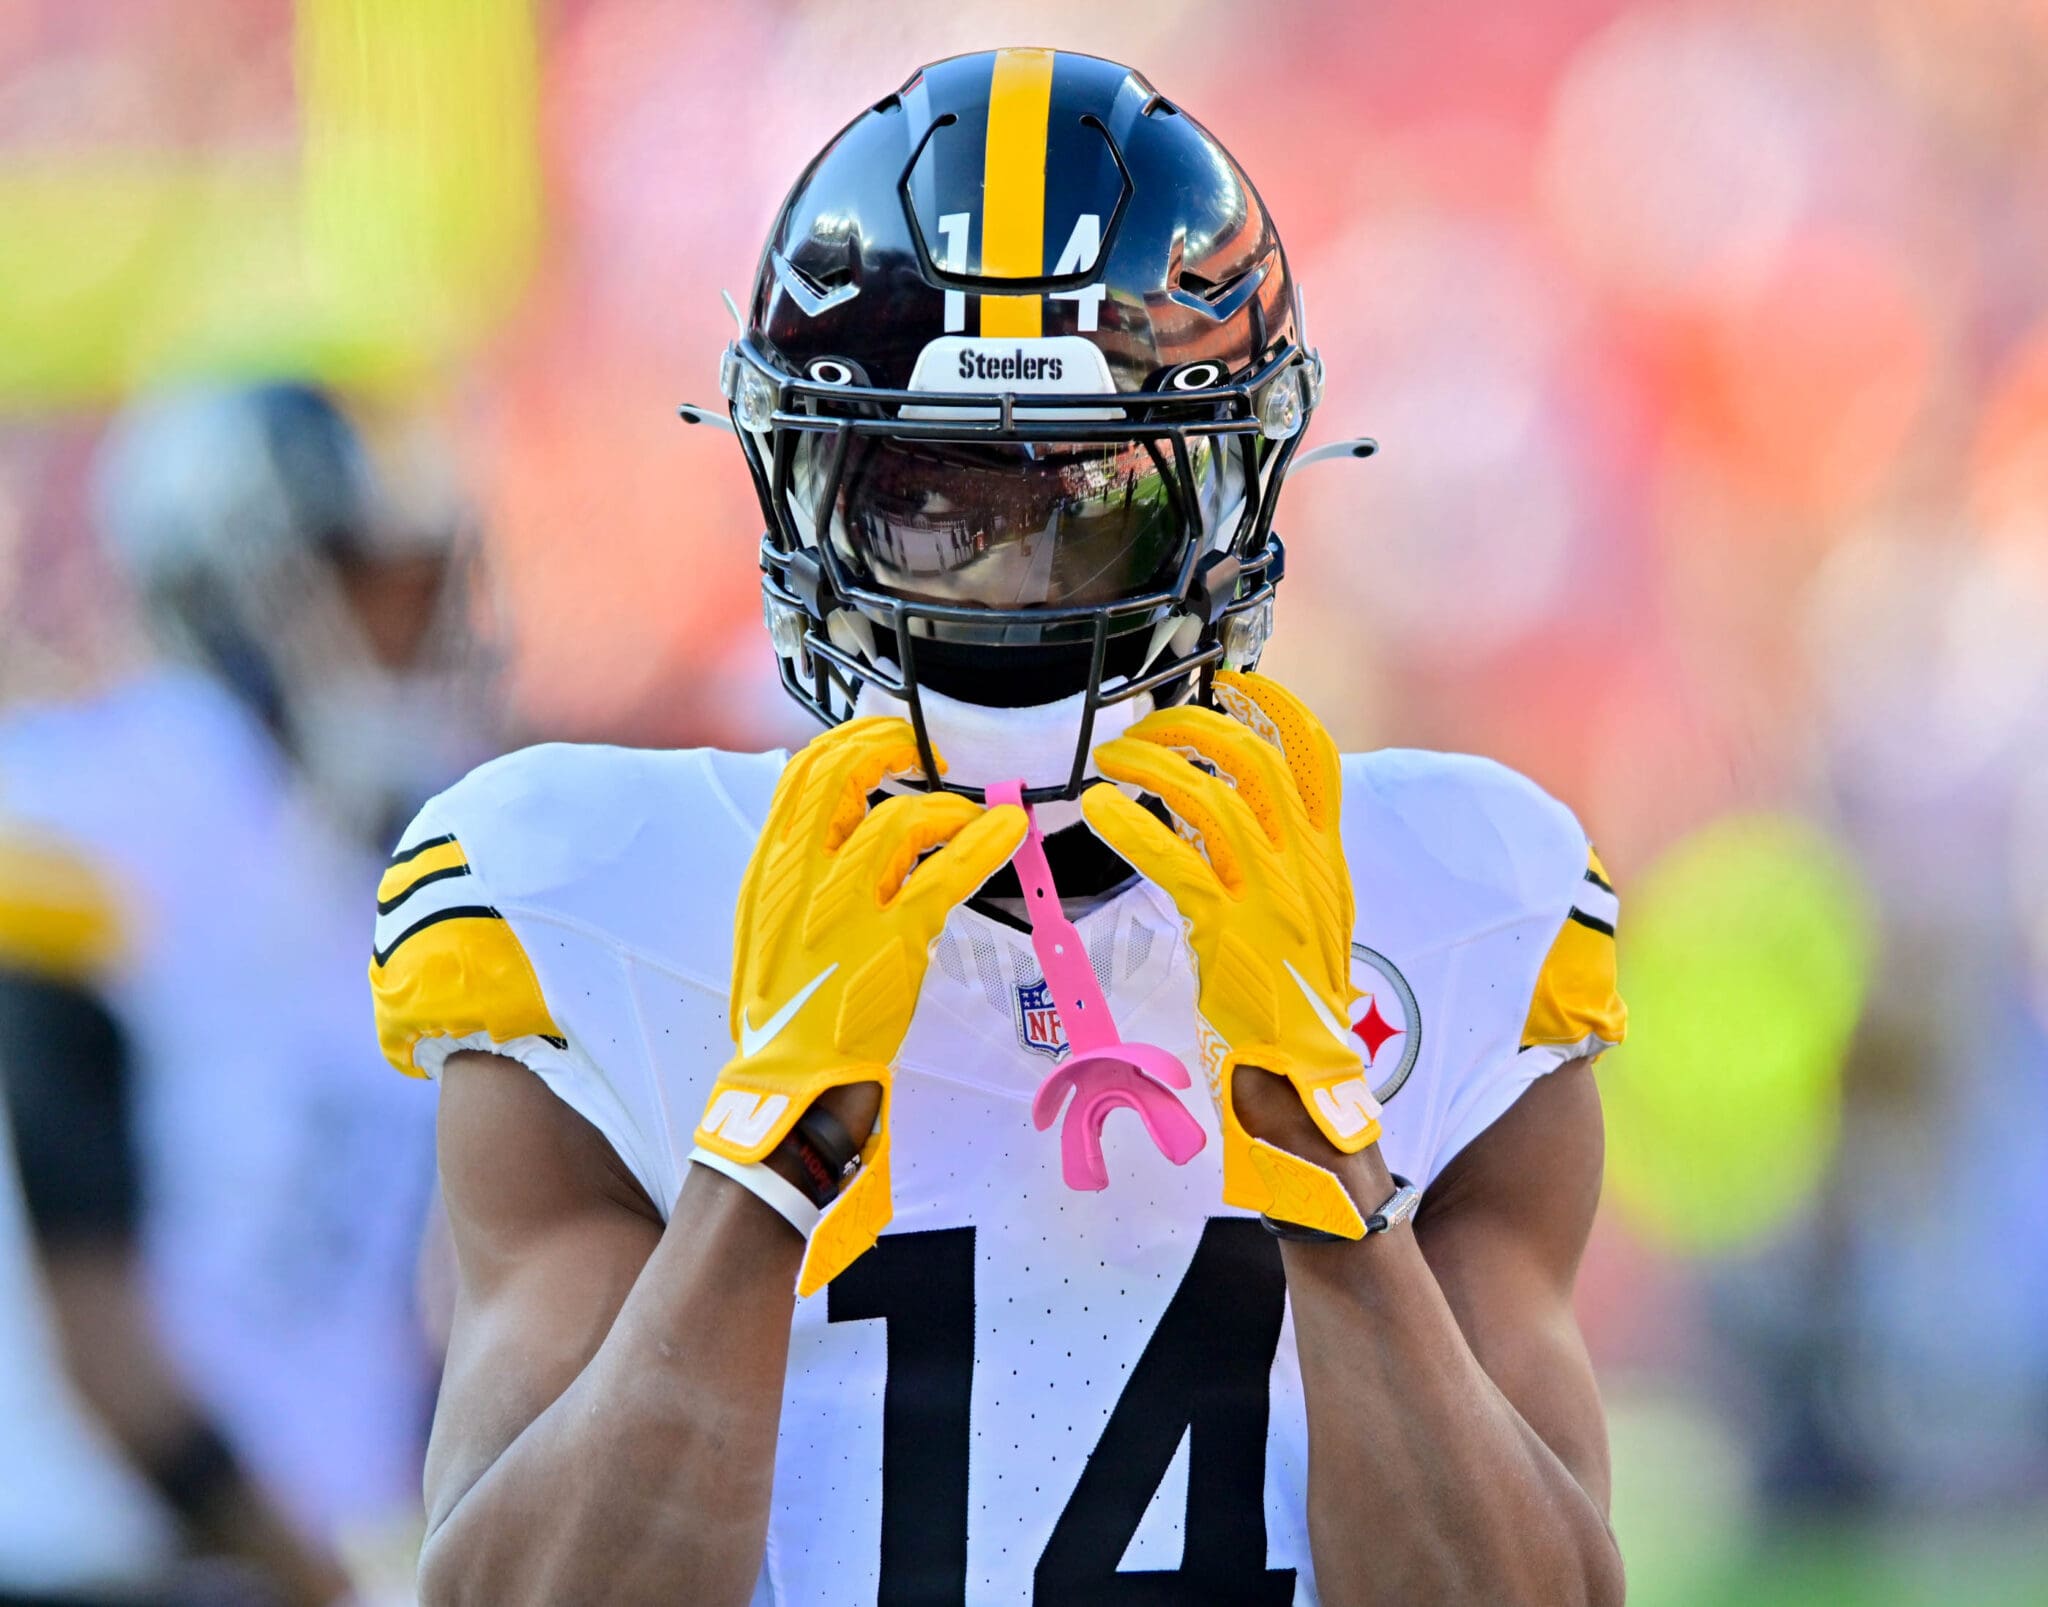 George Pickens is Right About Flawed Steelers Offense